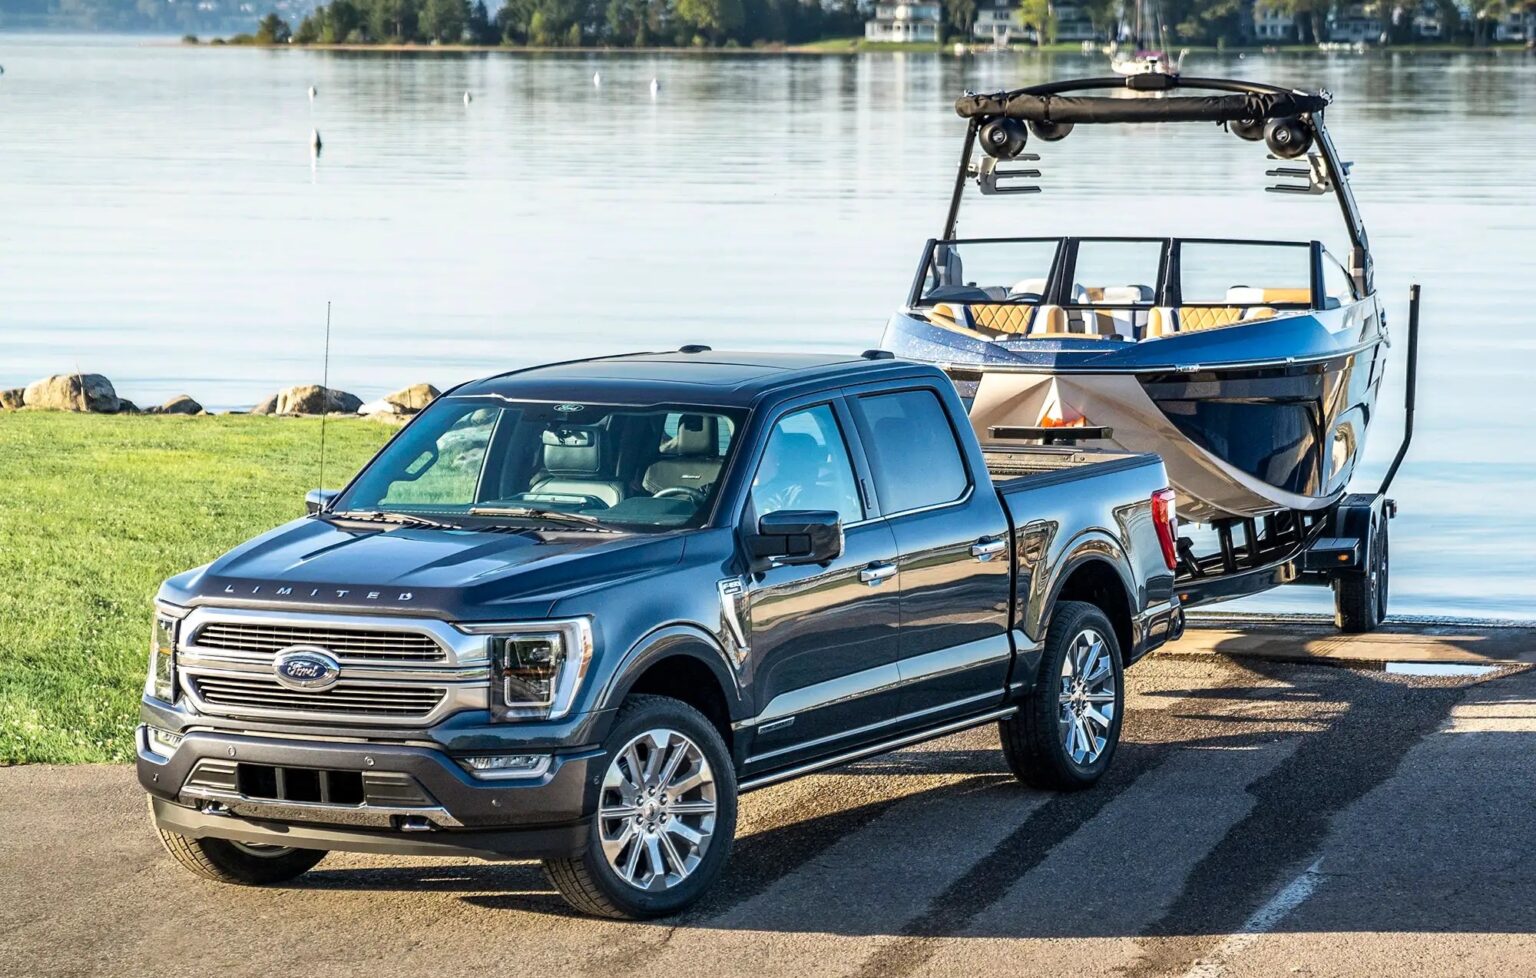 Ford F150 Towing Capacity Guide